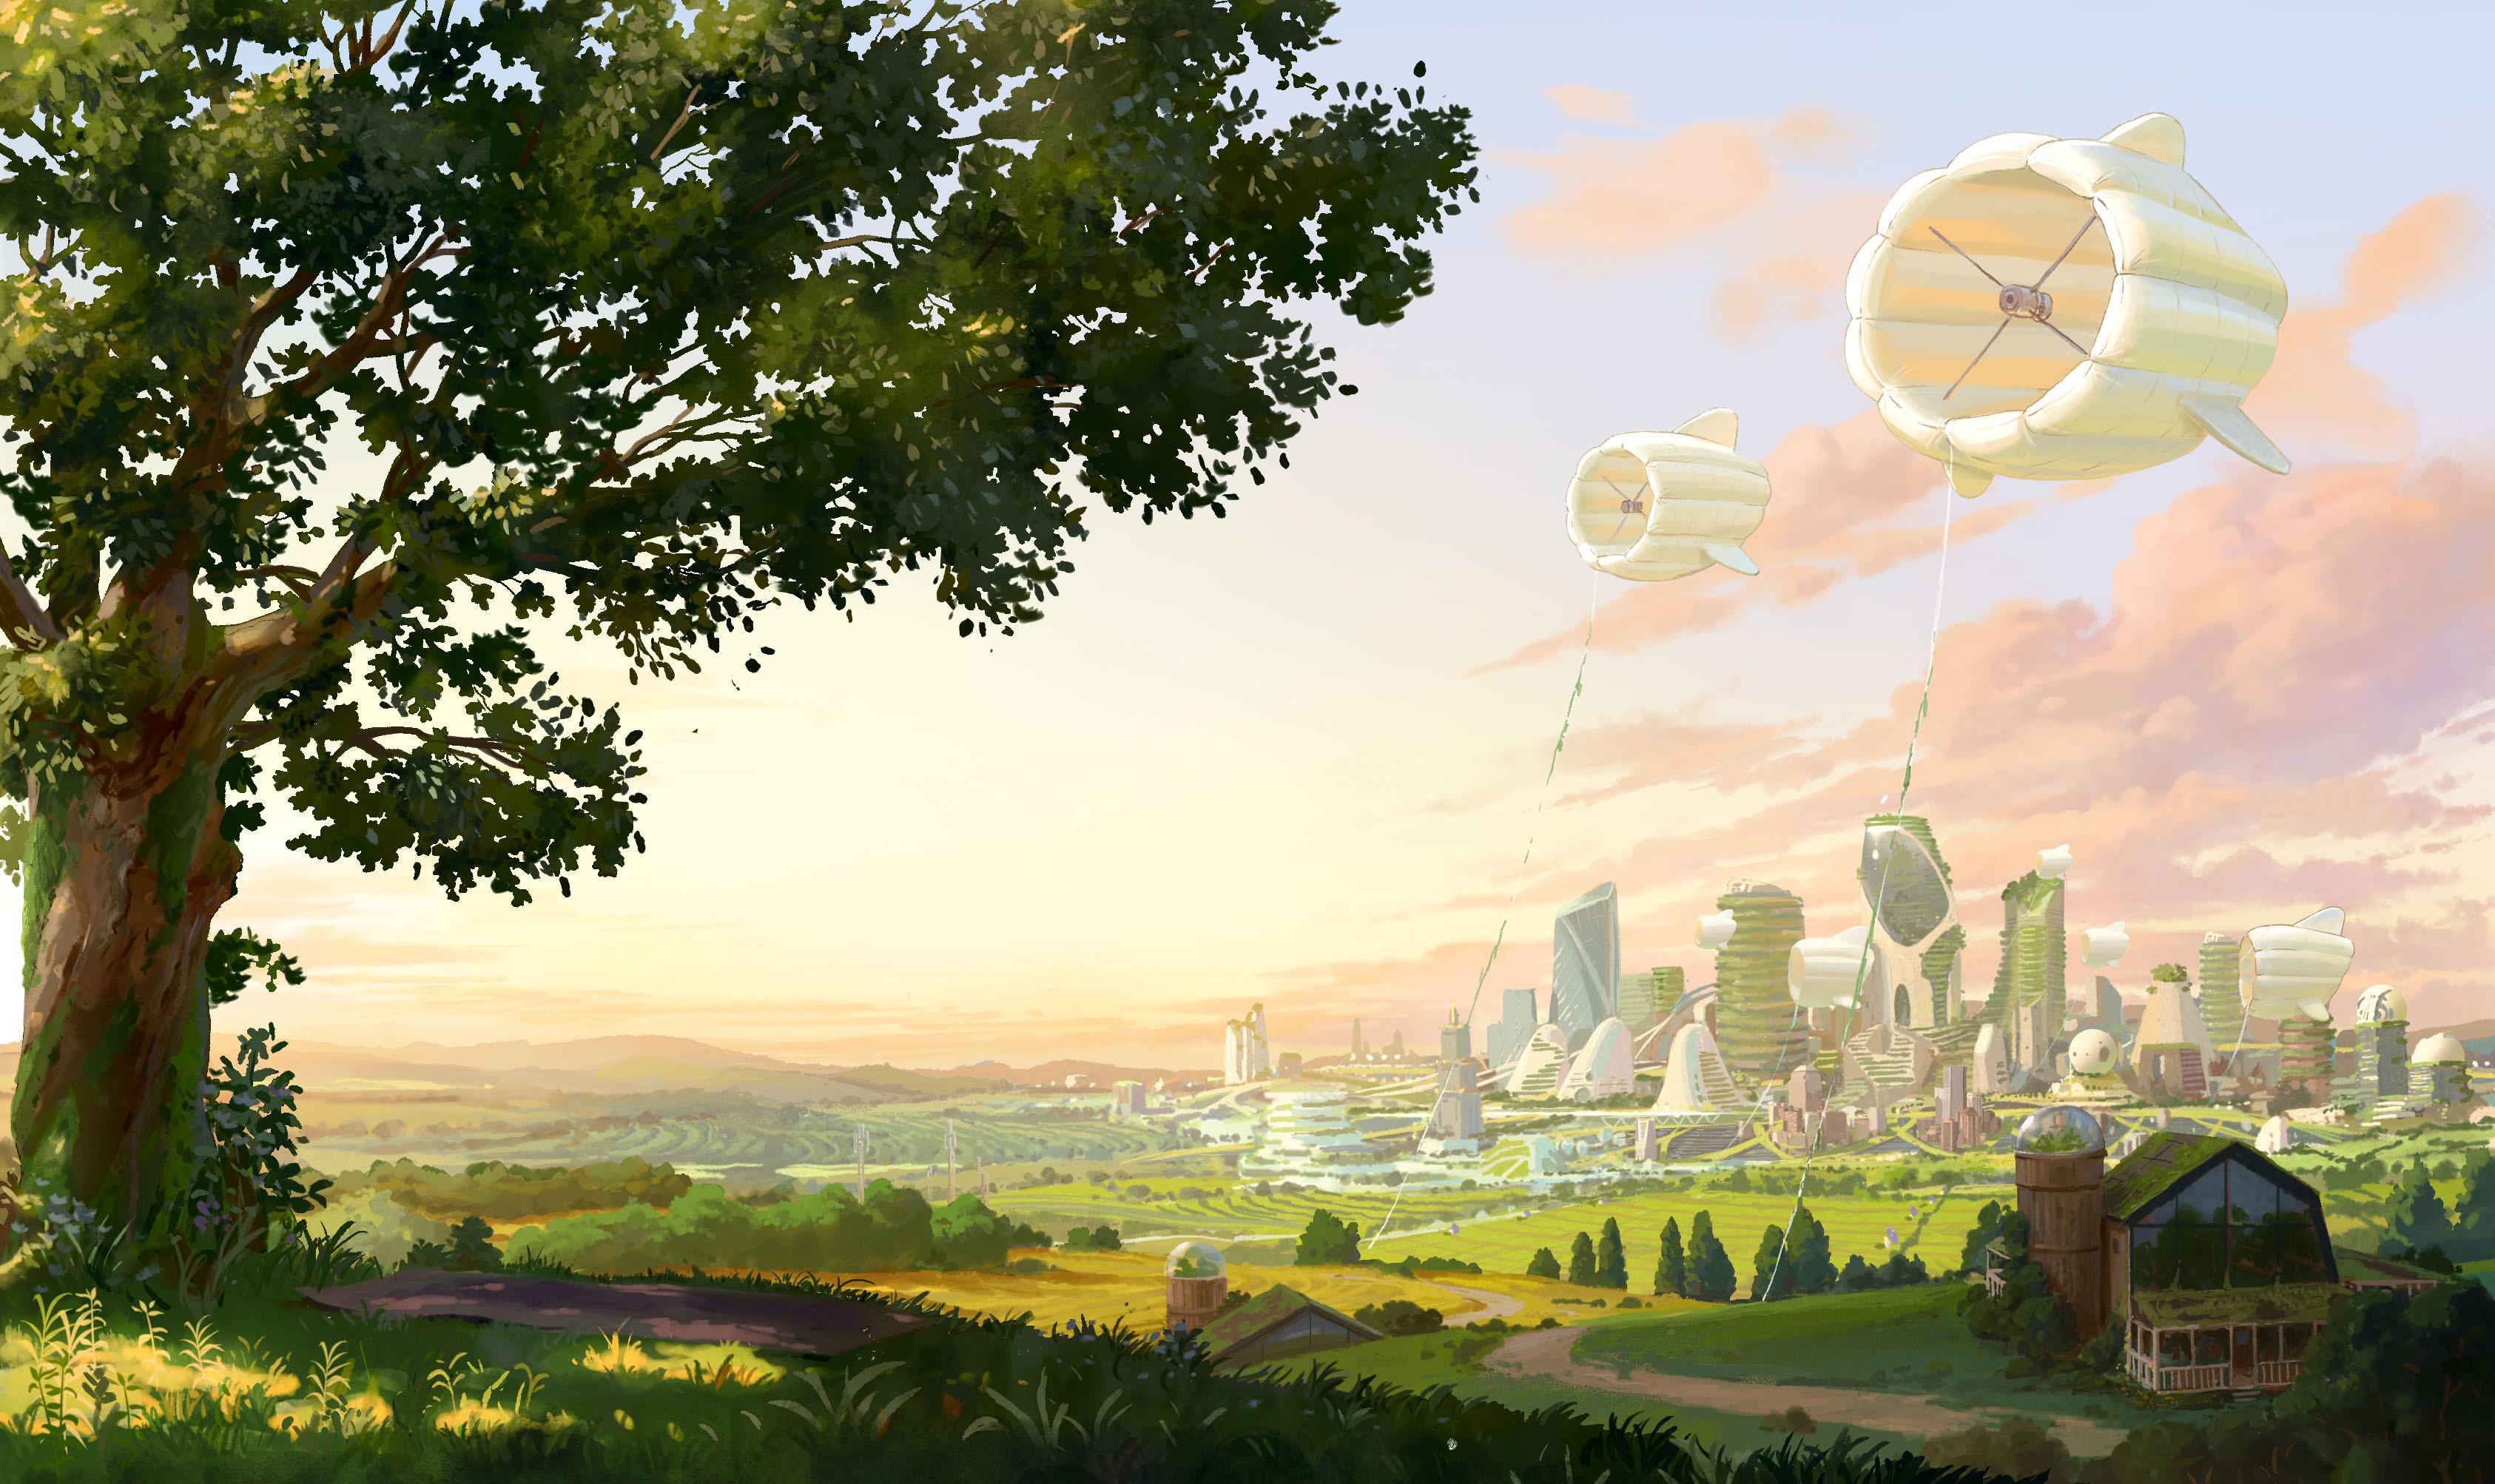 An illustration of a solarpunk landscape, heavy with greenery and windmills.